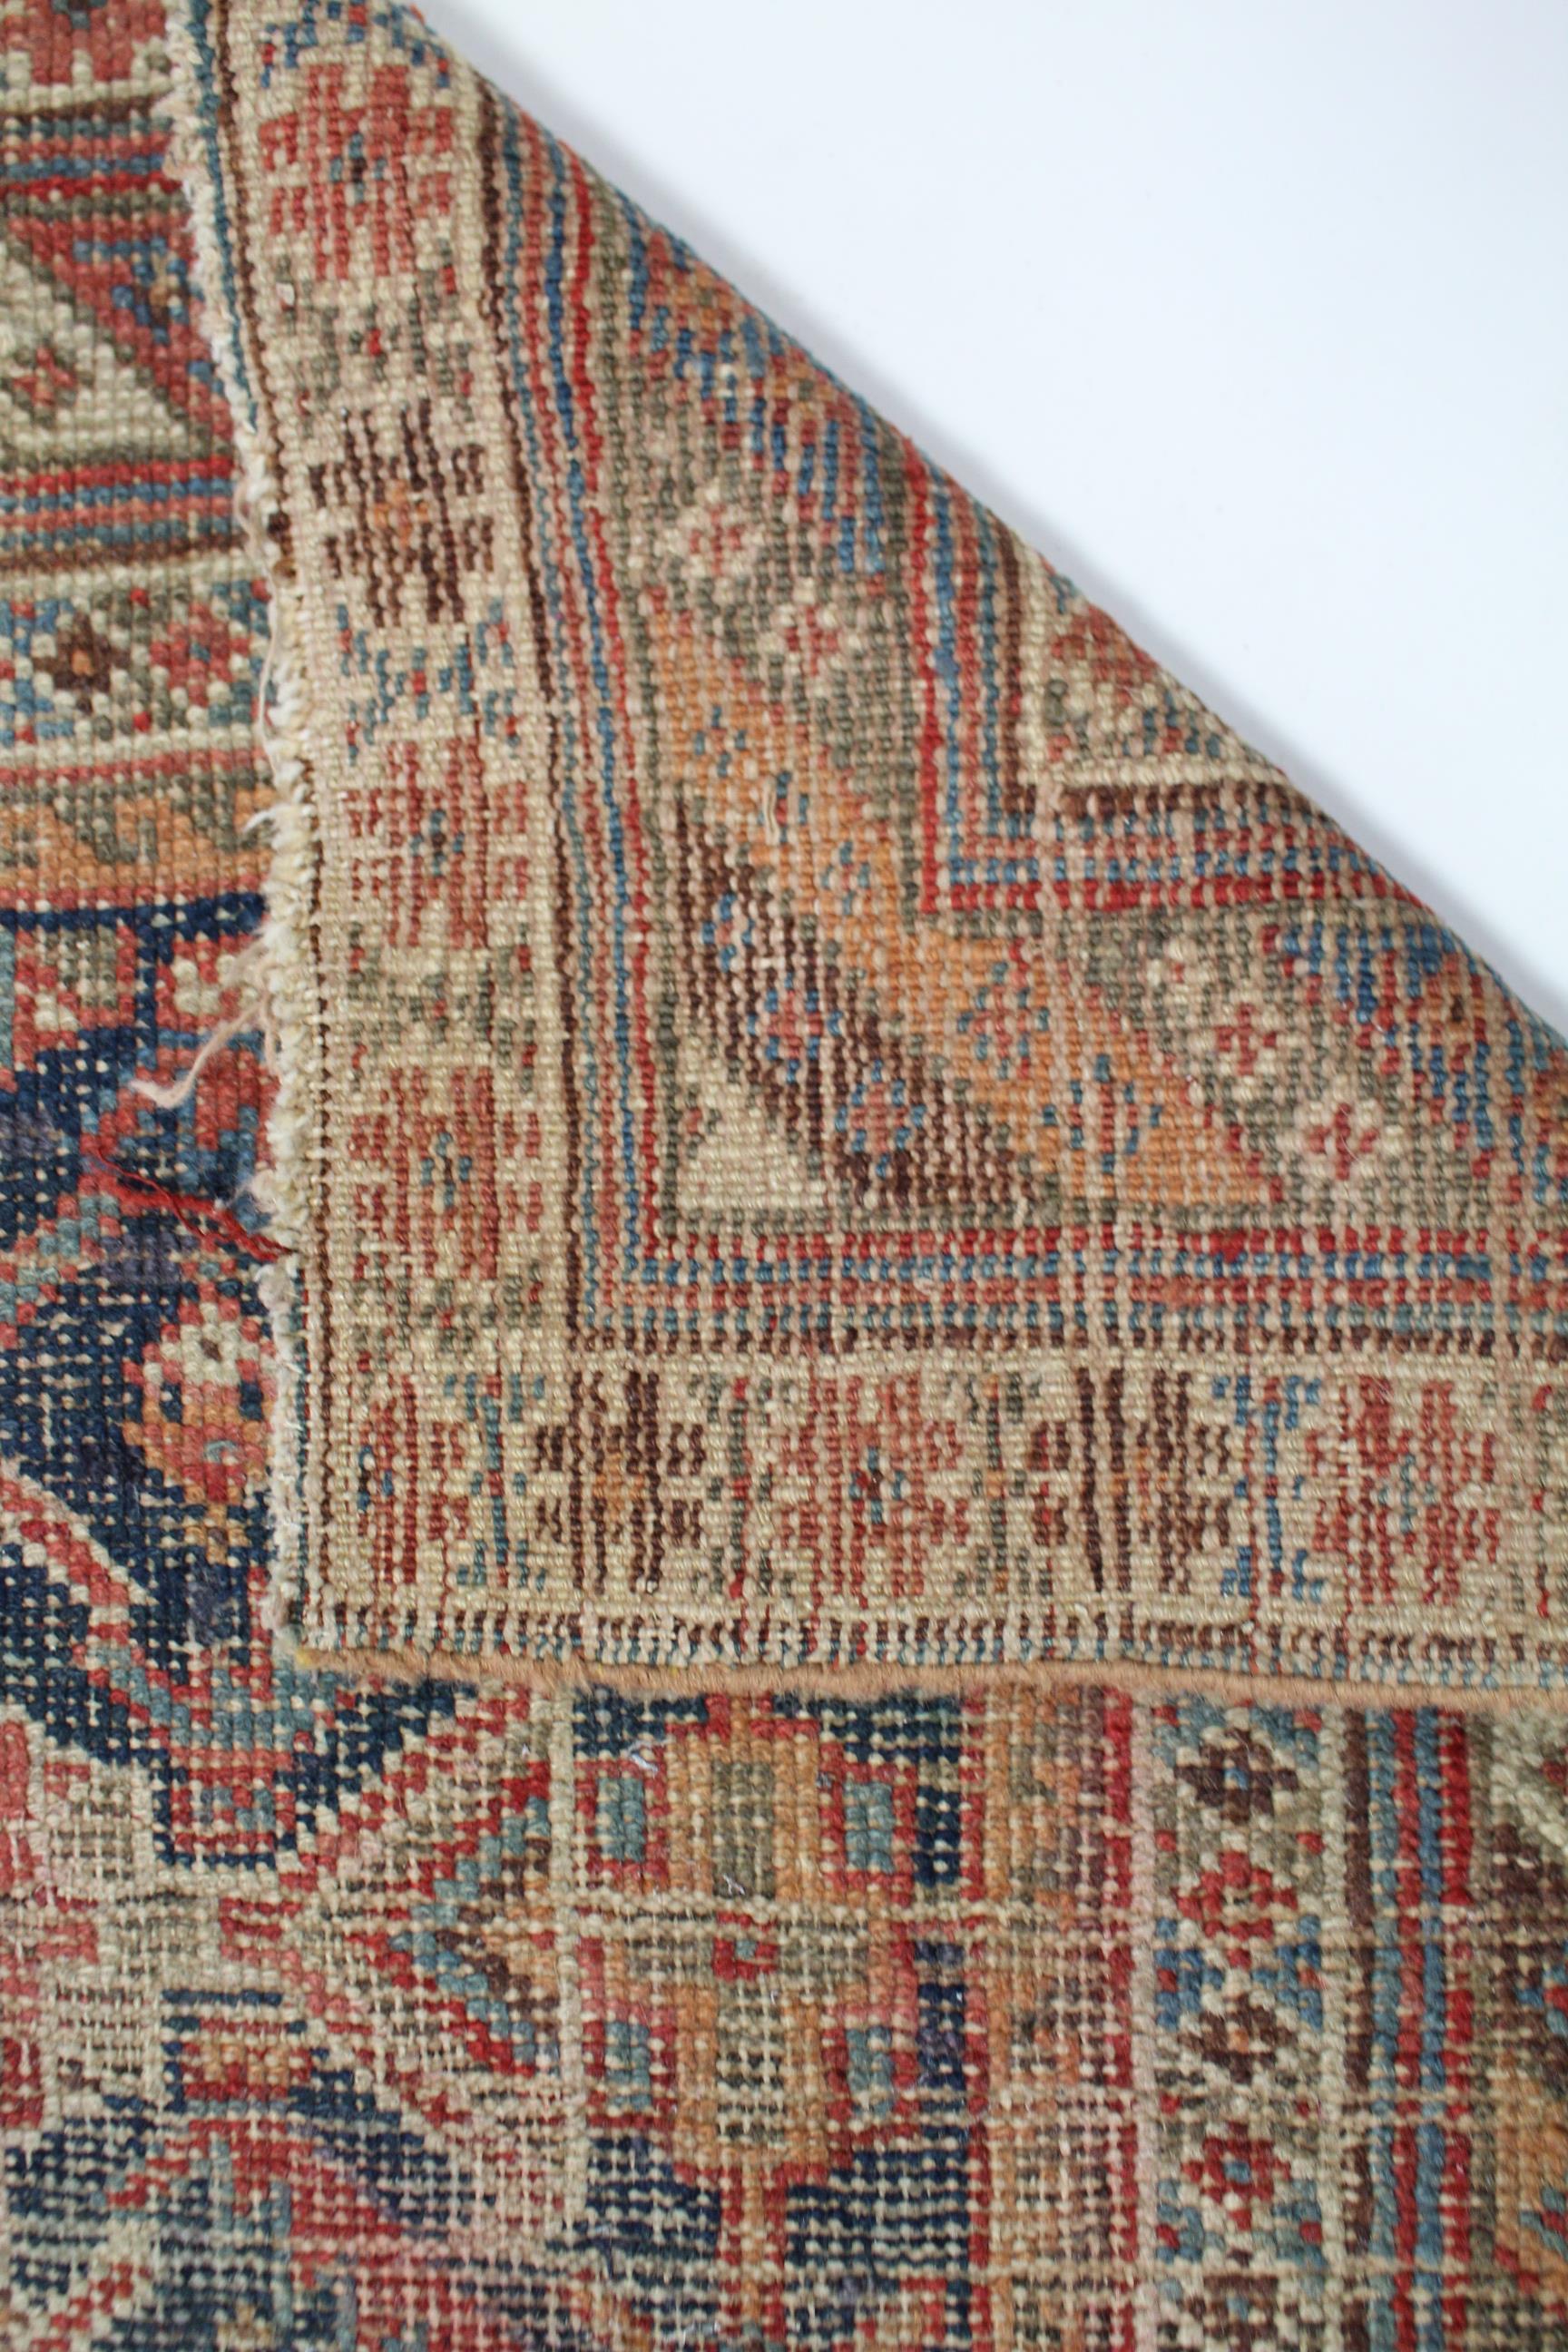 Two Persian pattern rugs, 81” x 4”, & 57” x 46” (one worn). - Image 2 of 4